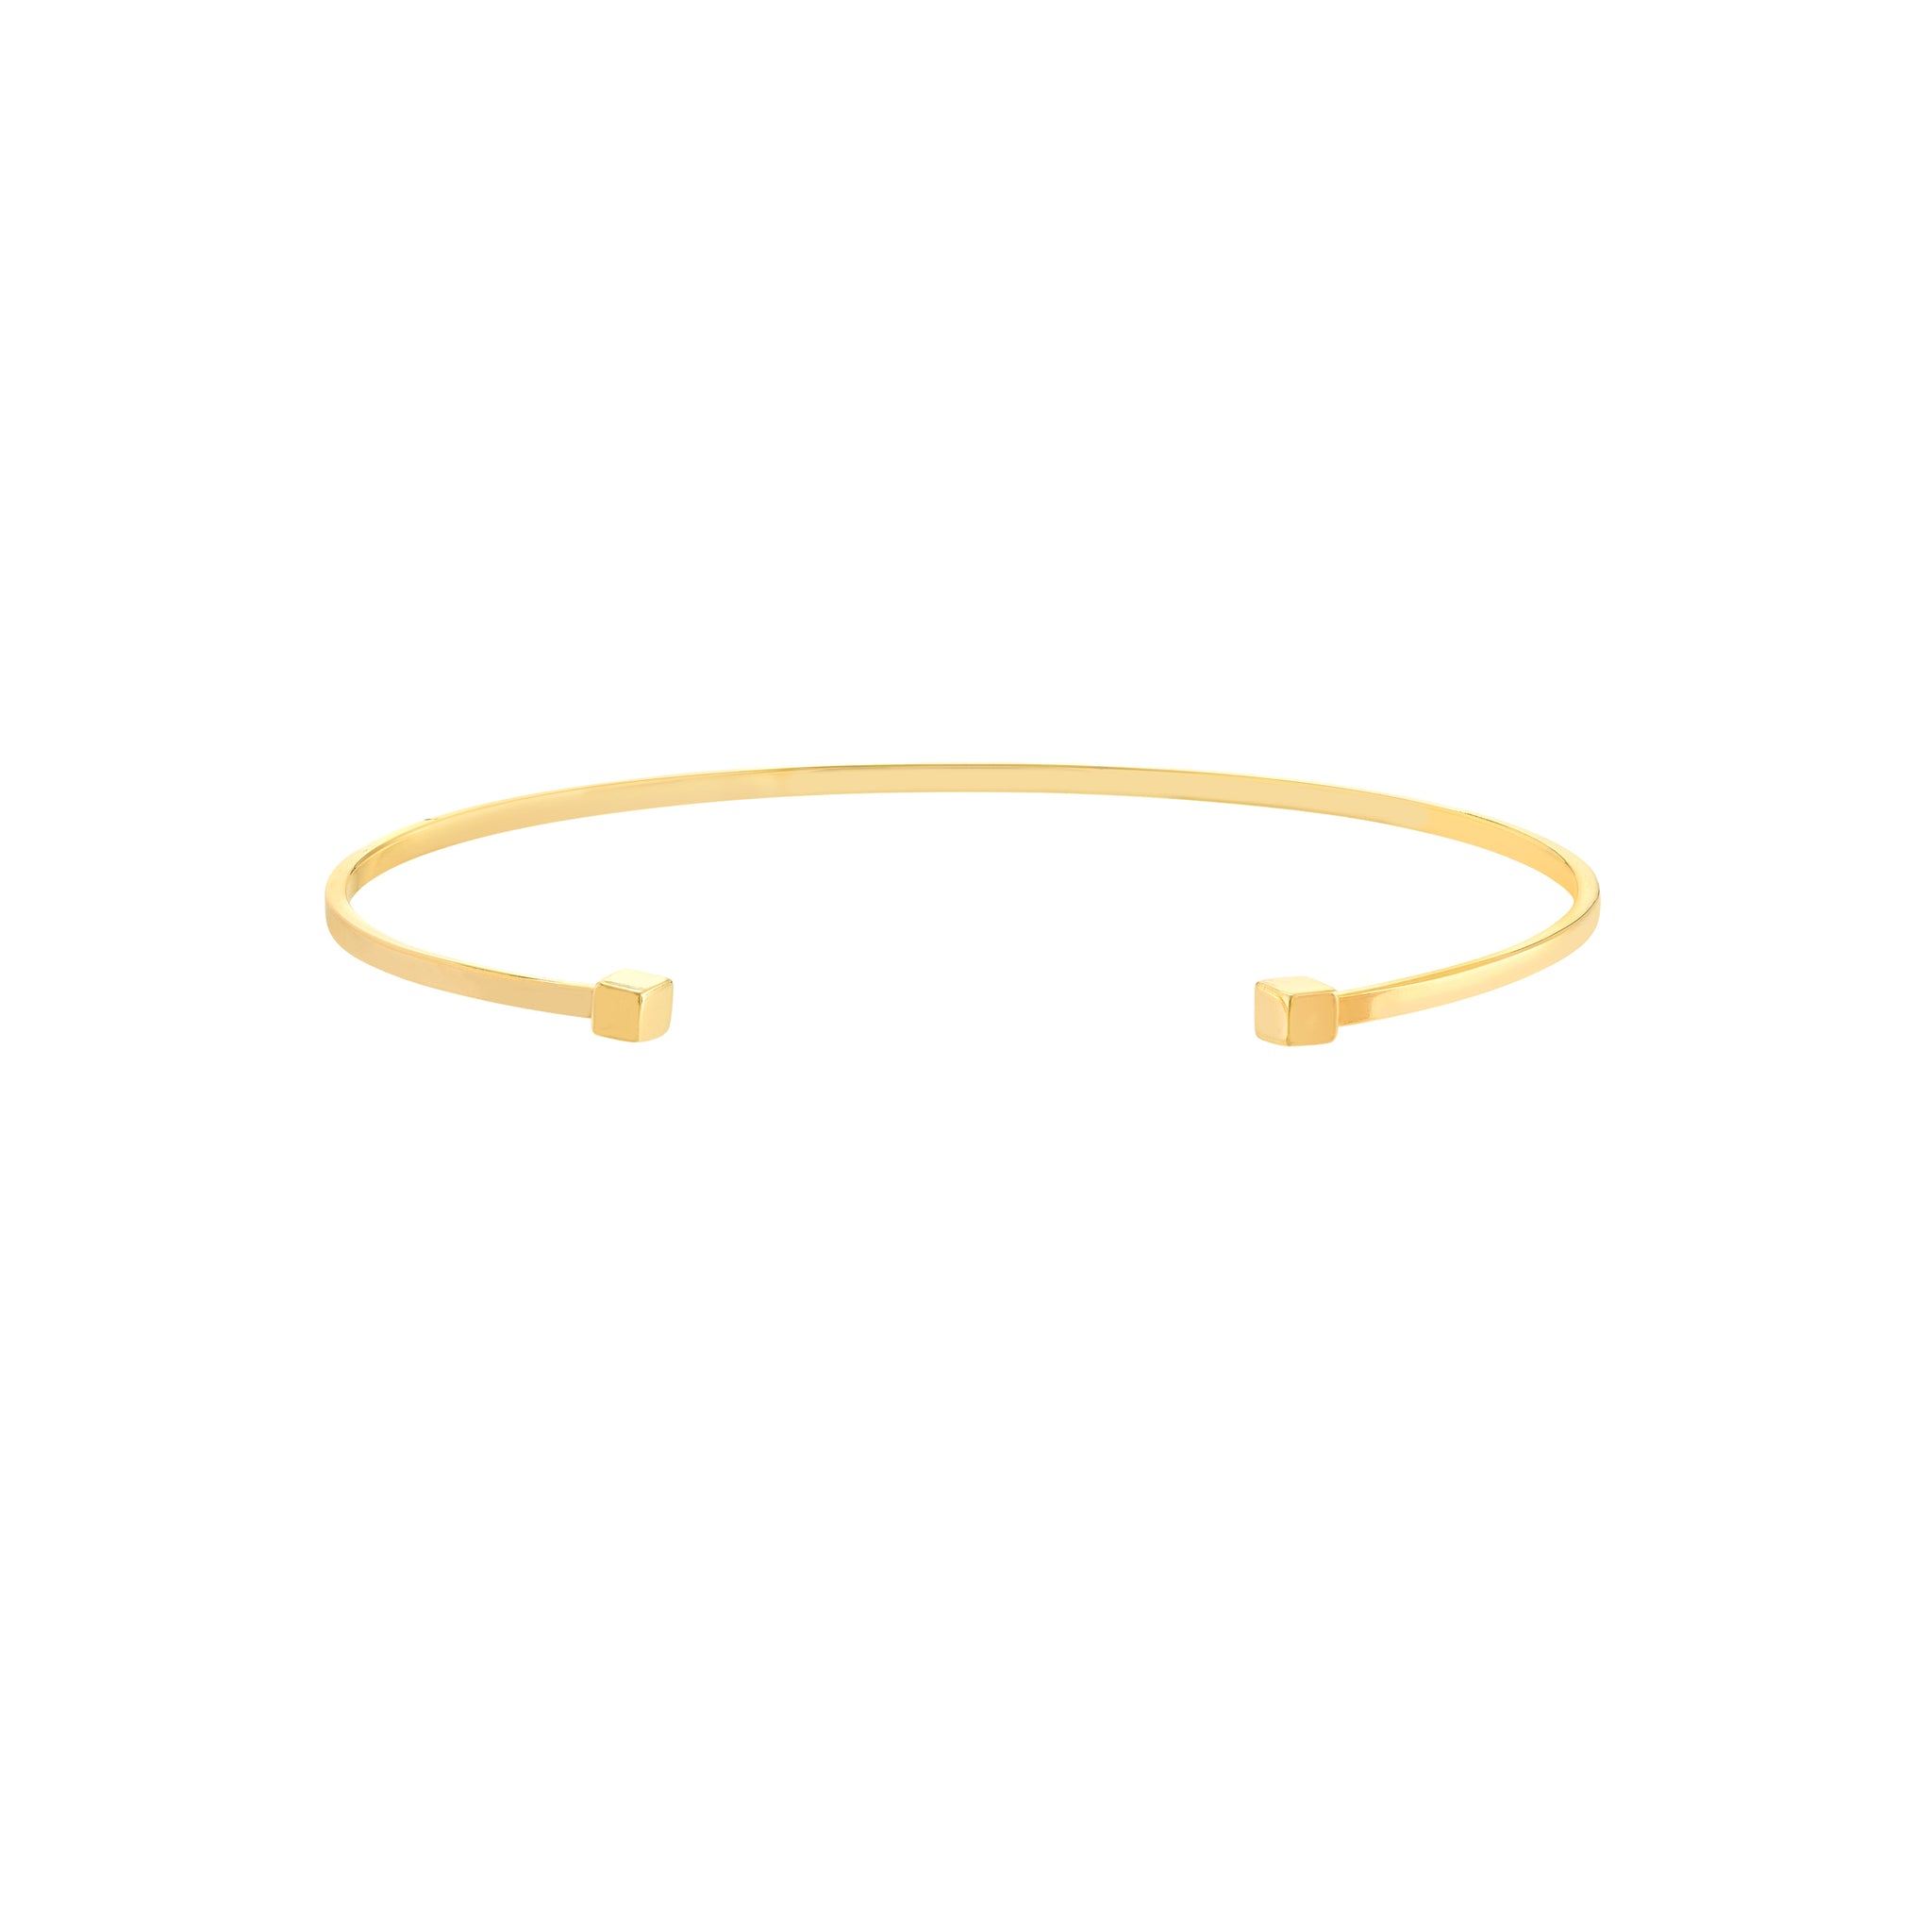 Hemsleys Collection 14K Open Round Wire Cuff Cubed Bangle